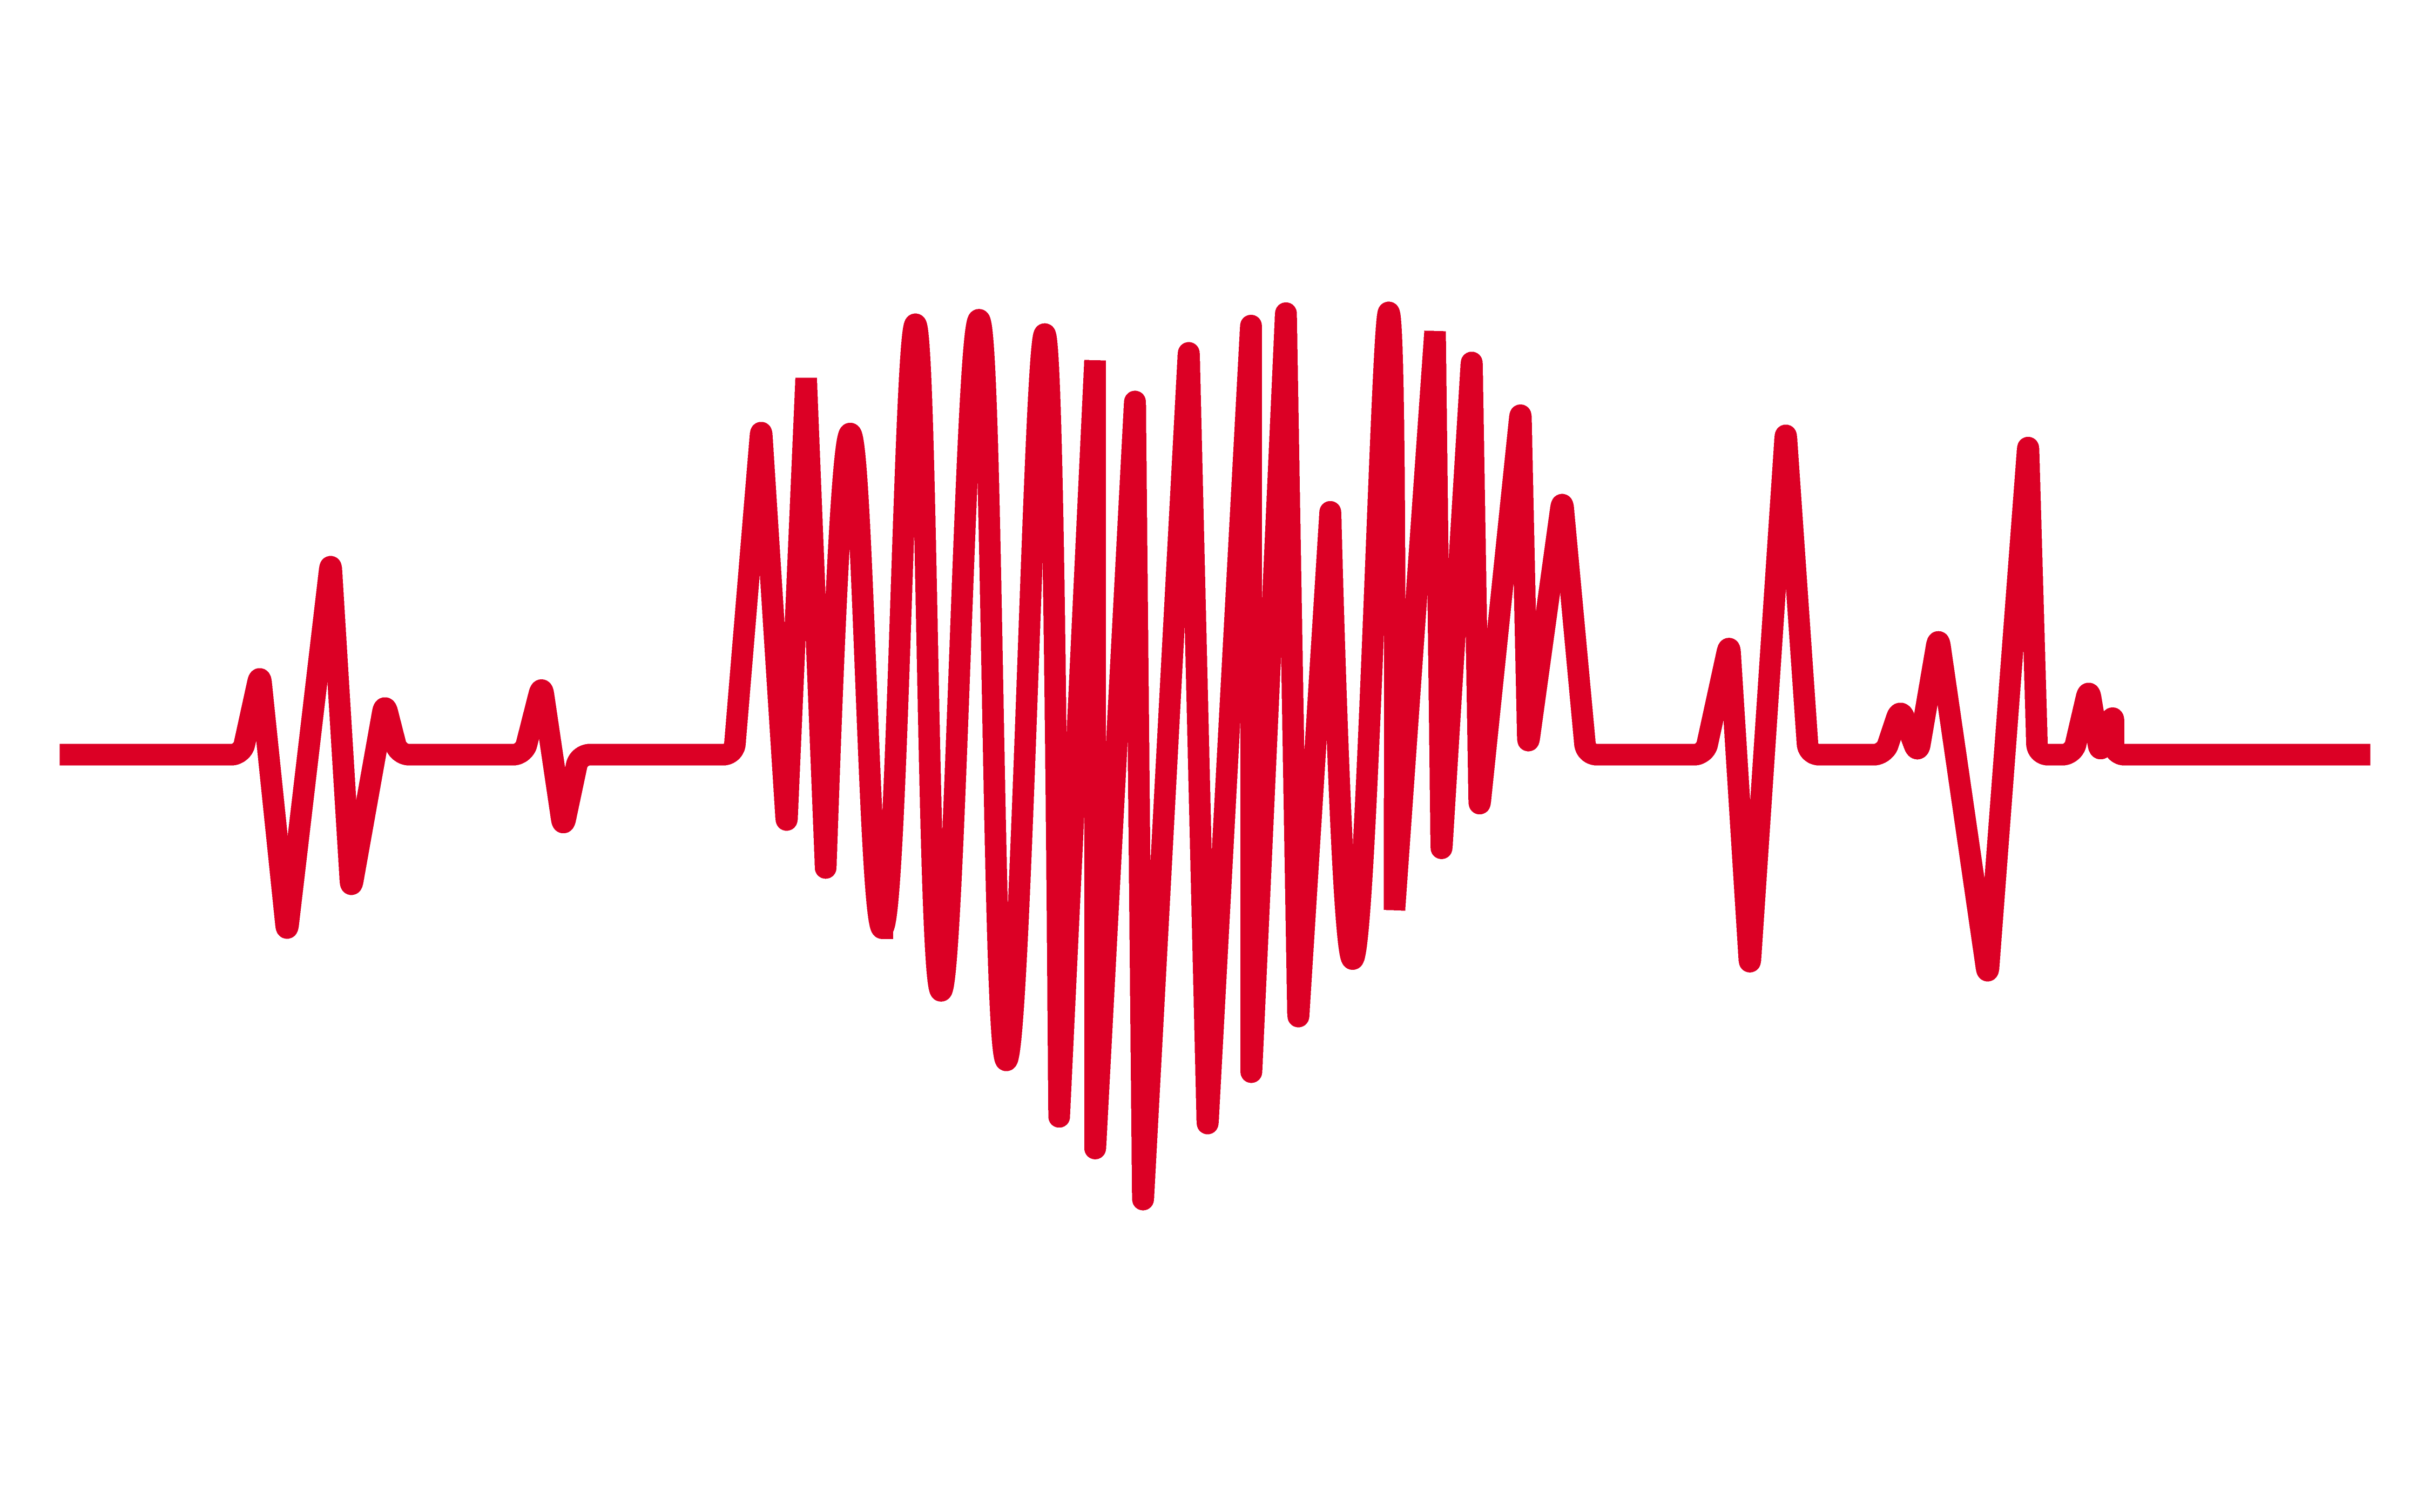 the shape of a heart in the style of a hospital heart monitor